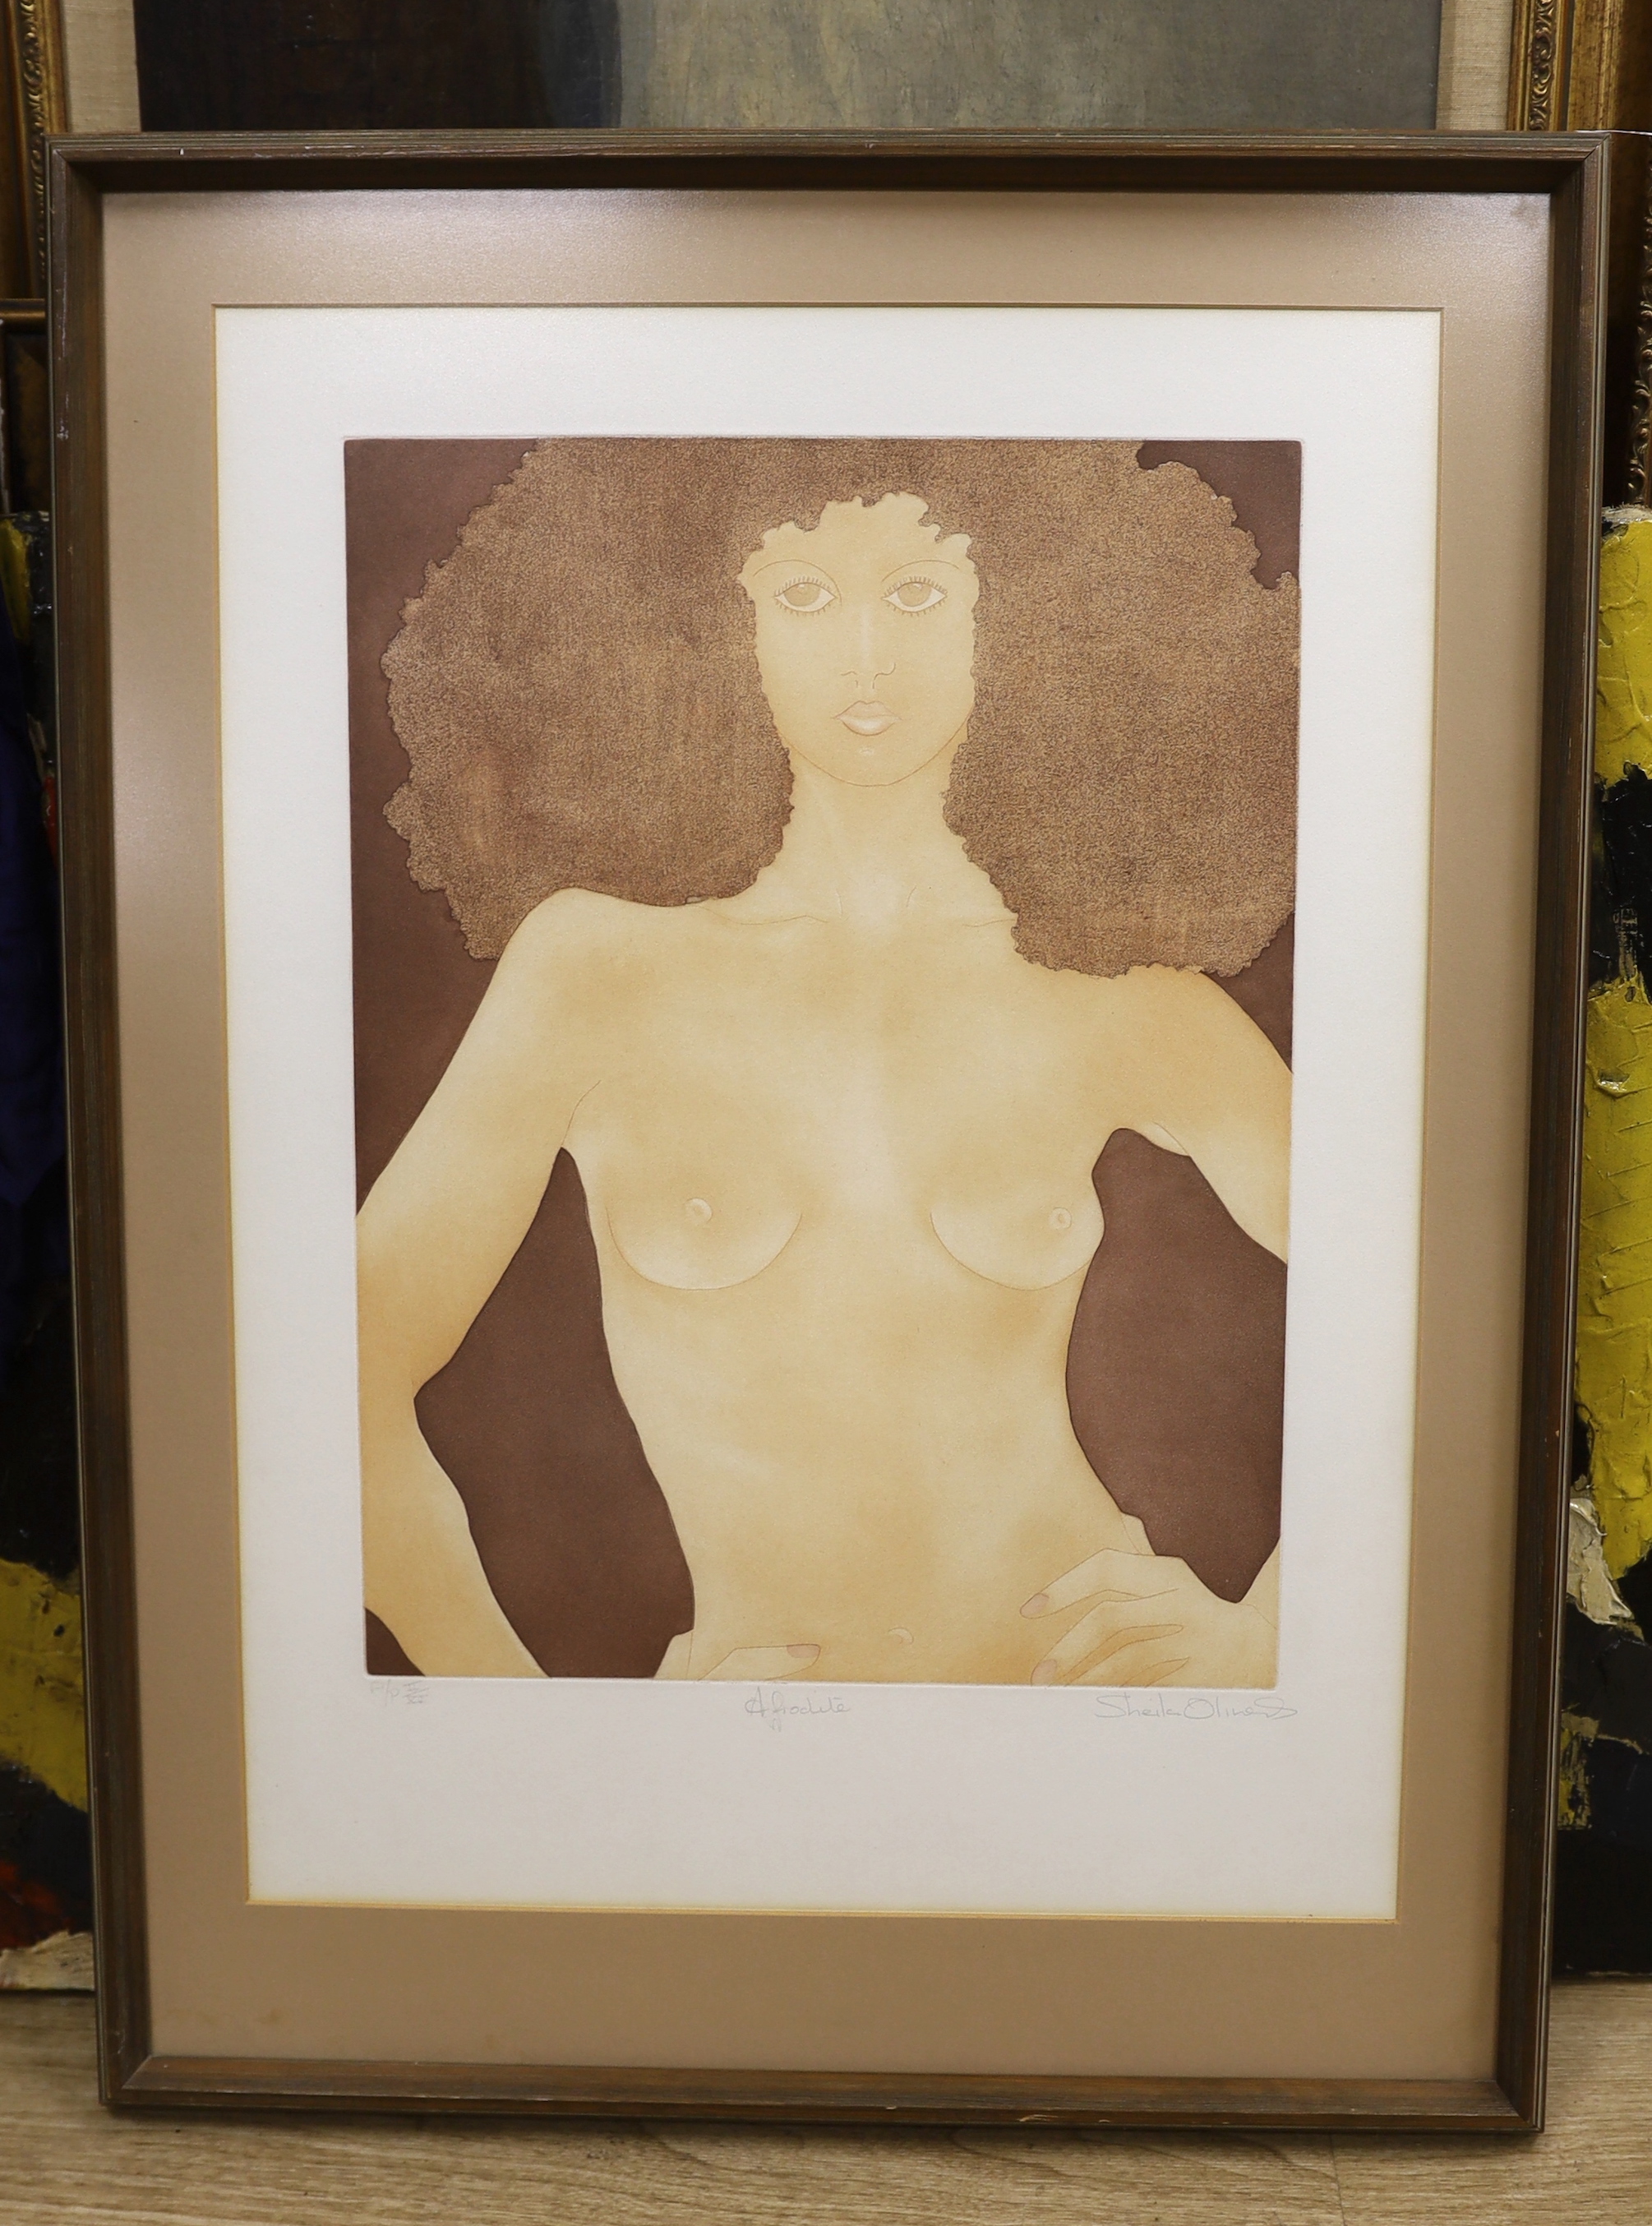 Sheila Oliner (1930-2020), artist's proof colour etching, ‘Aphrodite’, signed in pencil, limited edition II/XV, 65 x 47cm